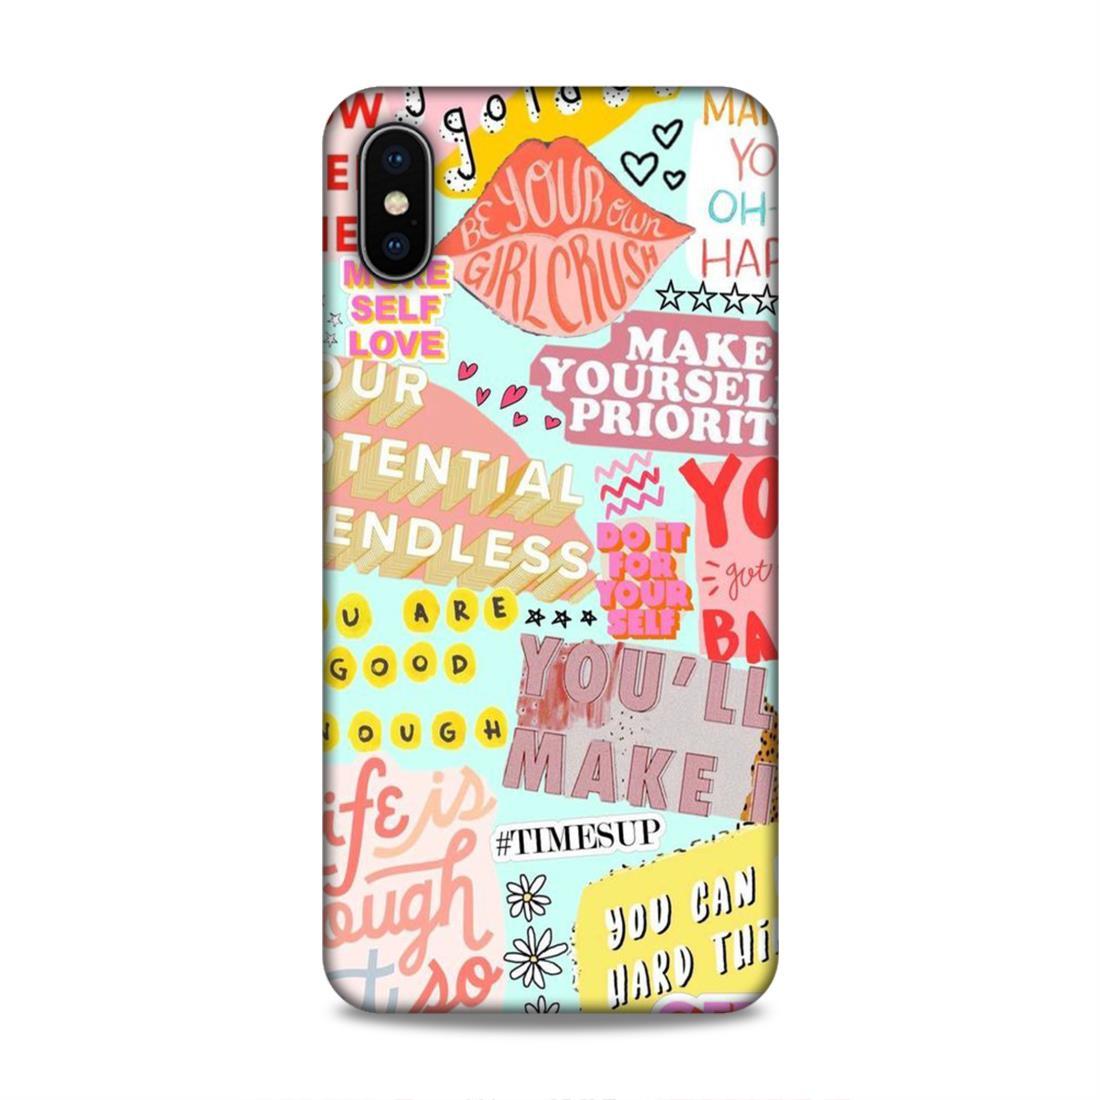 Do It For Your Self iPhone XS Max Mobile Cover